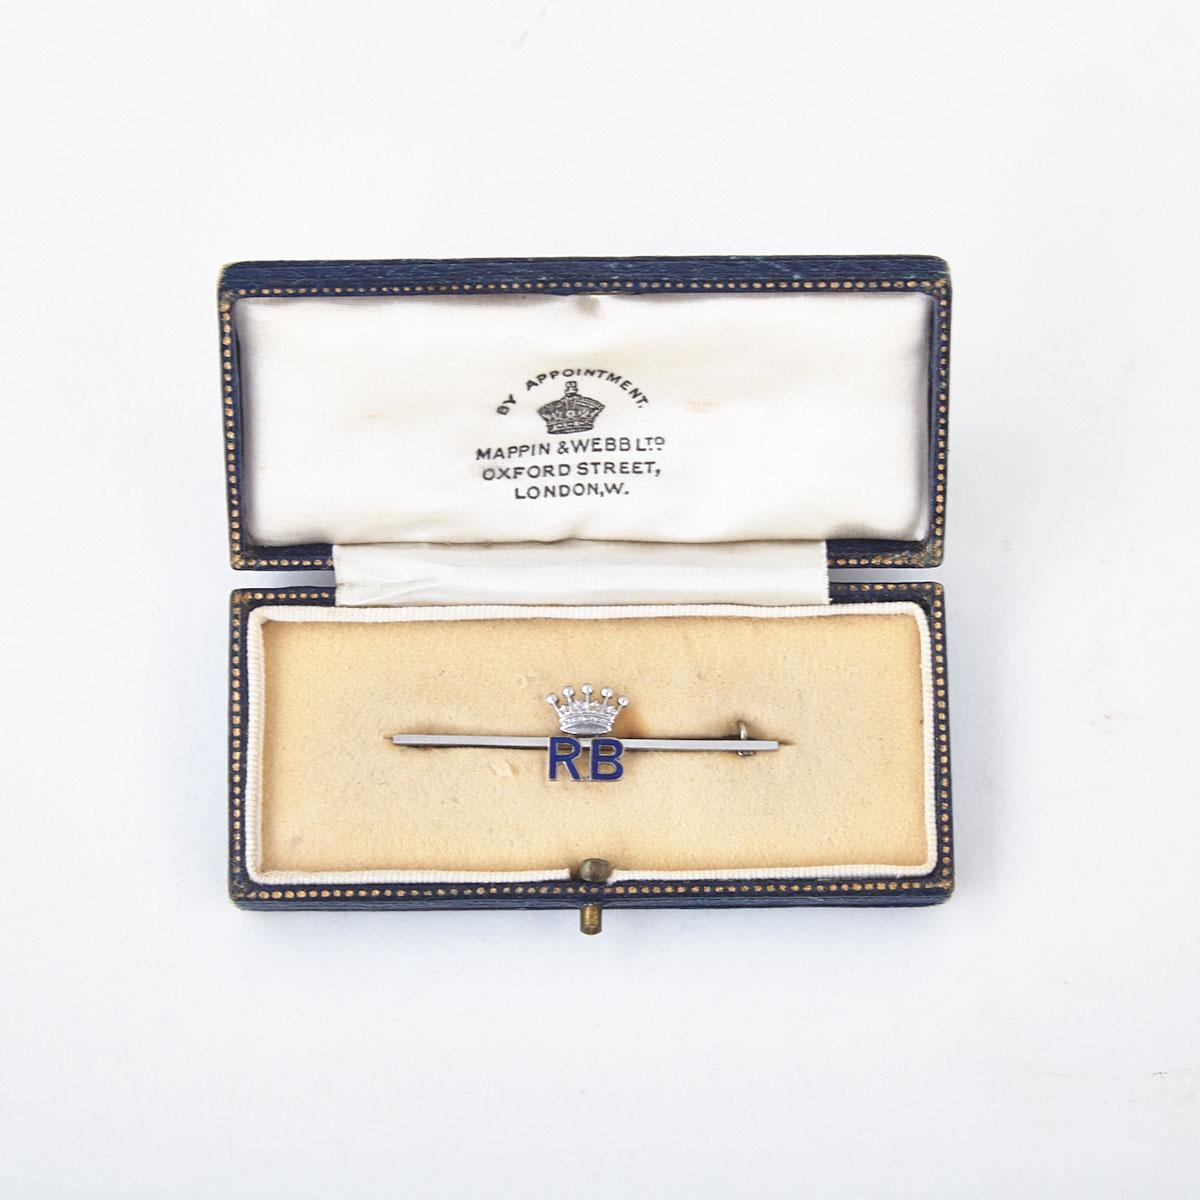 Gold and Platinum Stick Pin Monogrammed RB for Roberte Ponsonby, Countess of Bessborough, early-mid 20th century